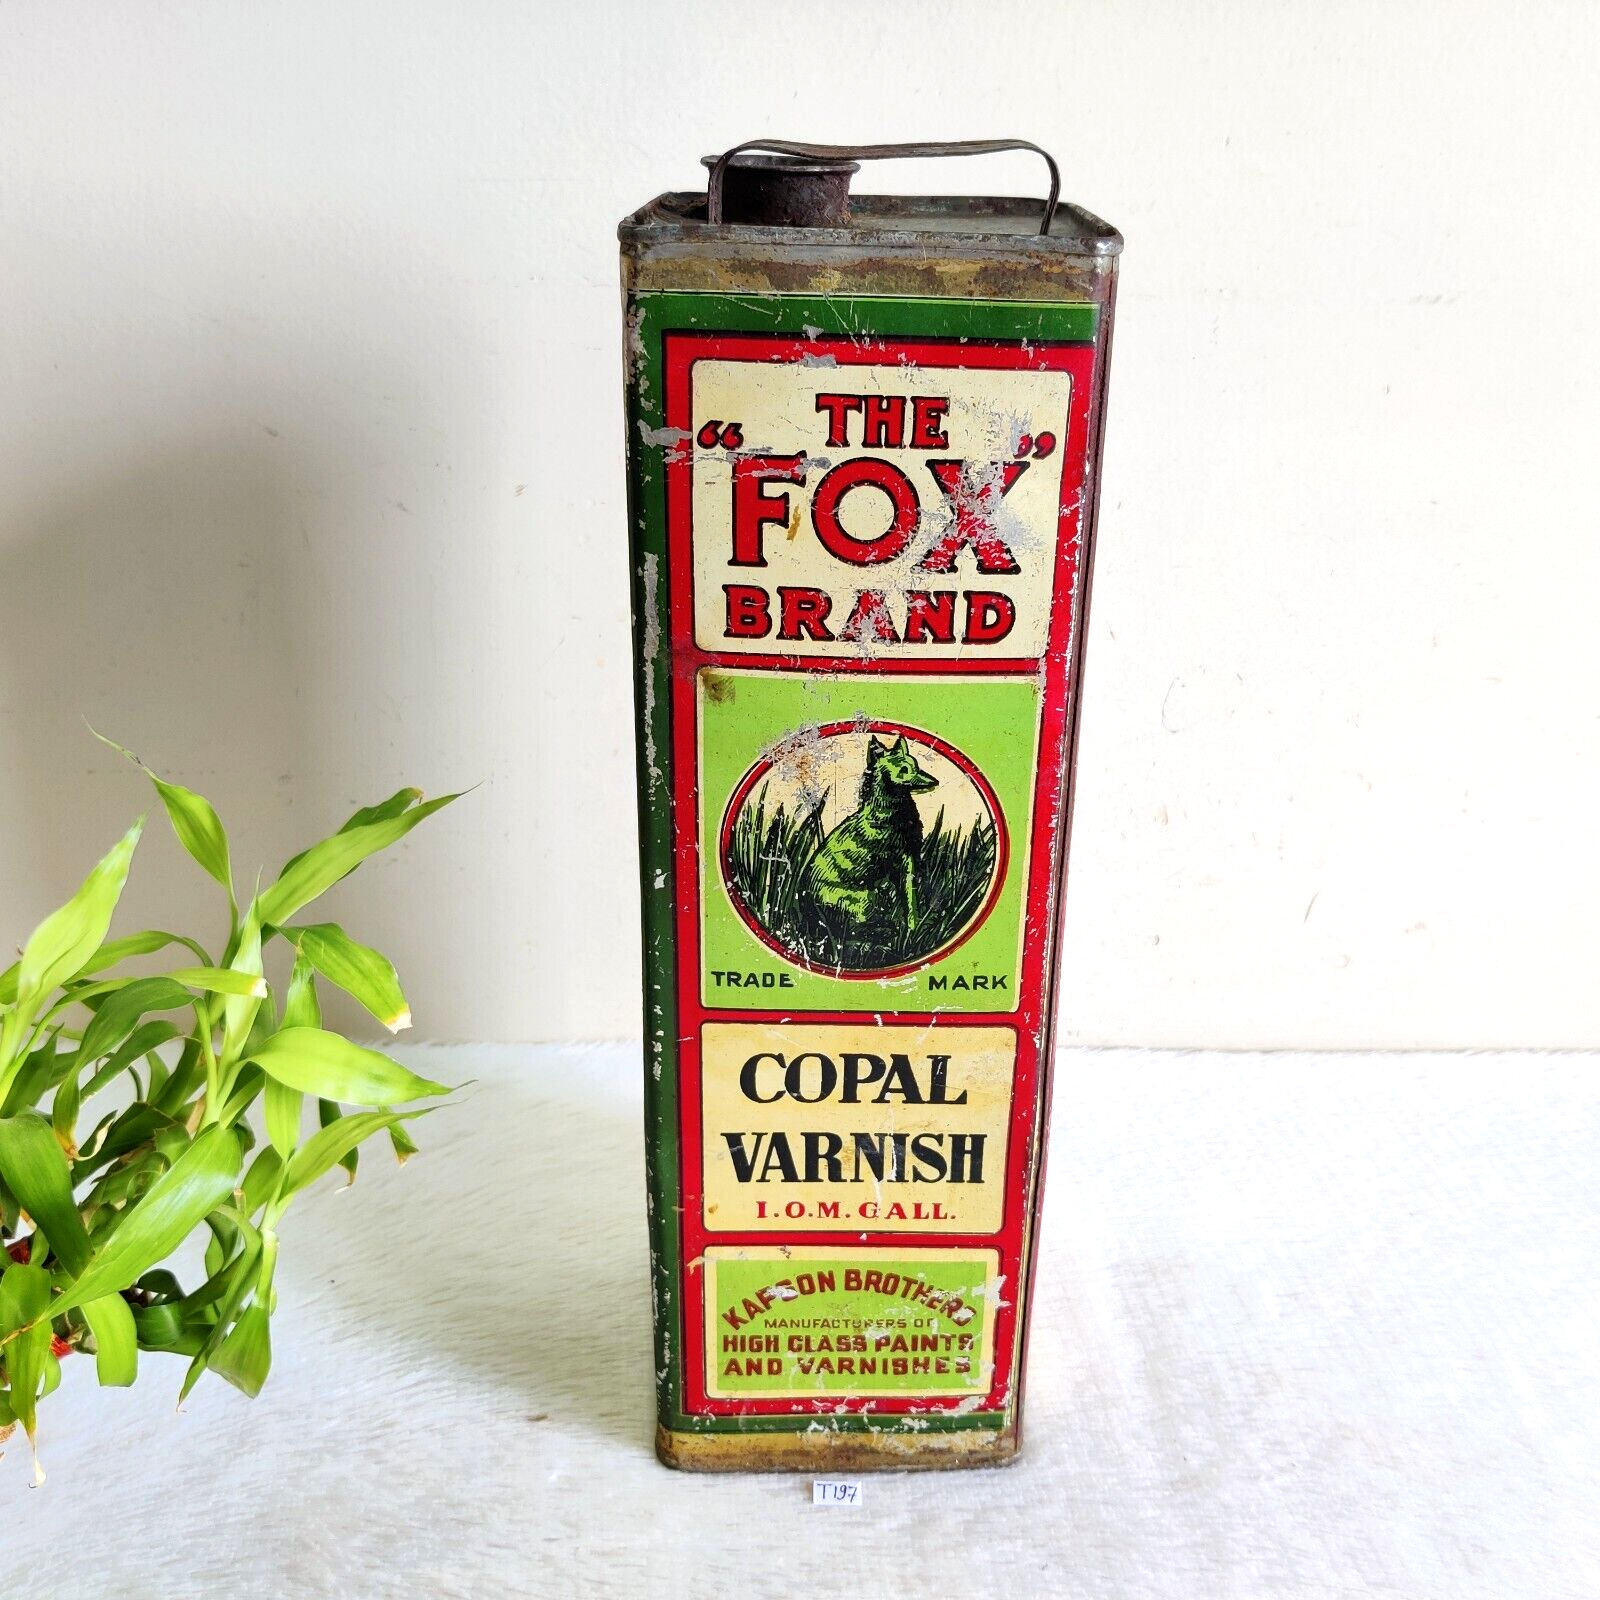 1940s Vintage The Fox Brand Copal Varnish Advertising Tin Can Collectible T197